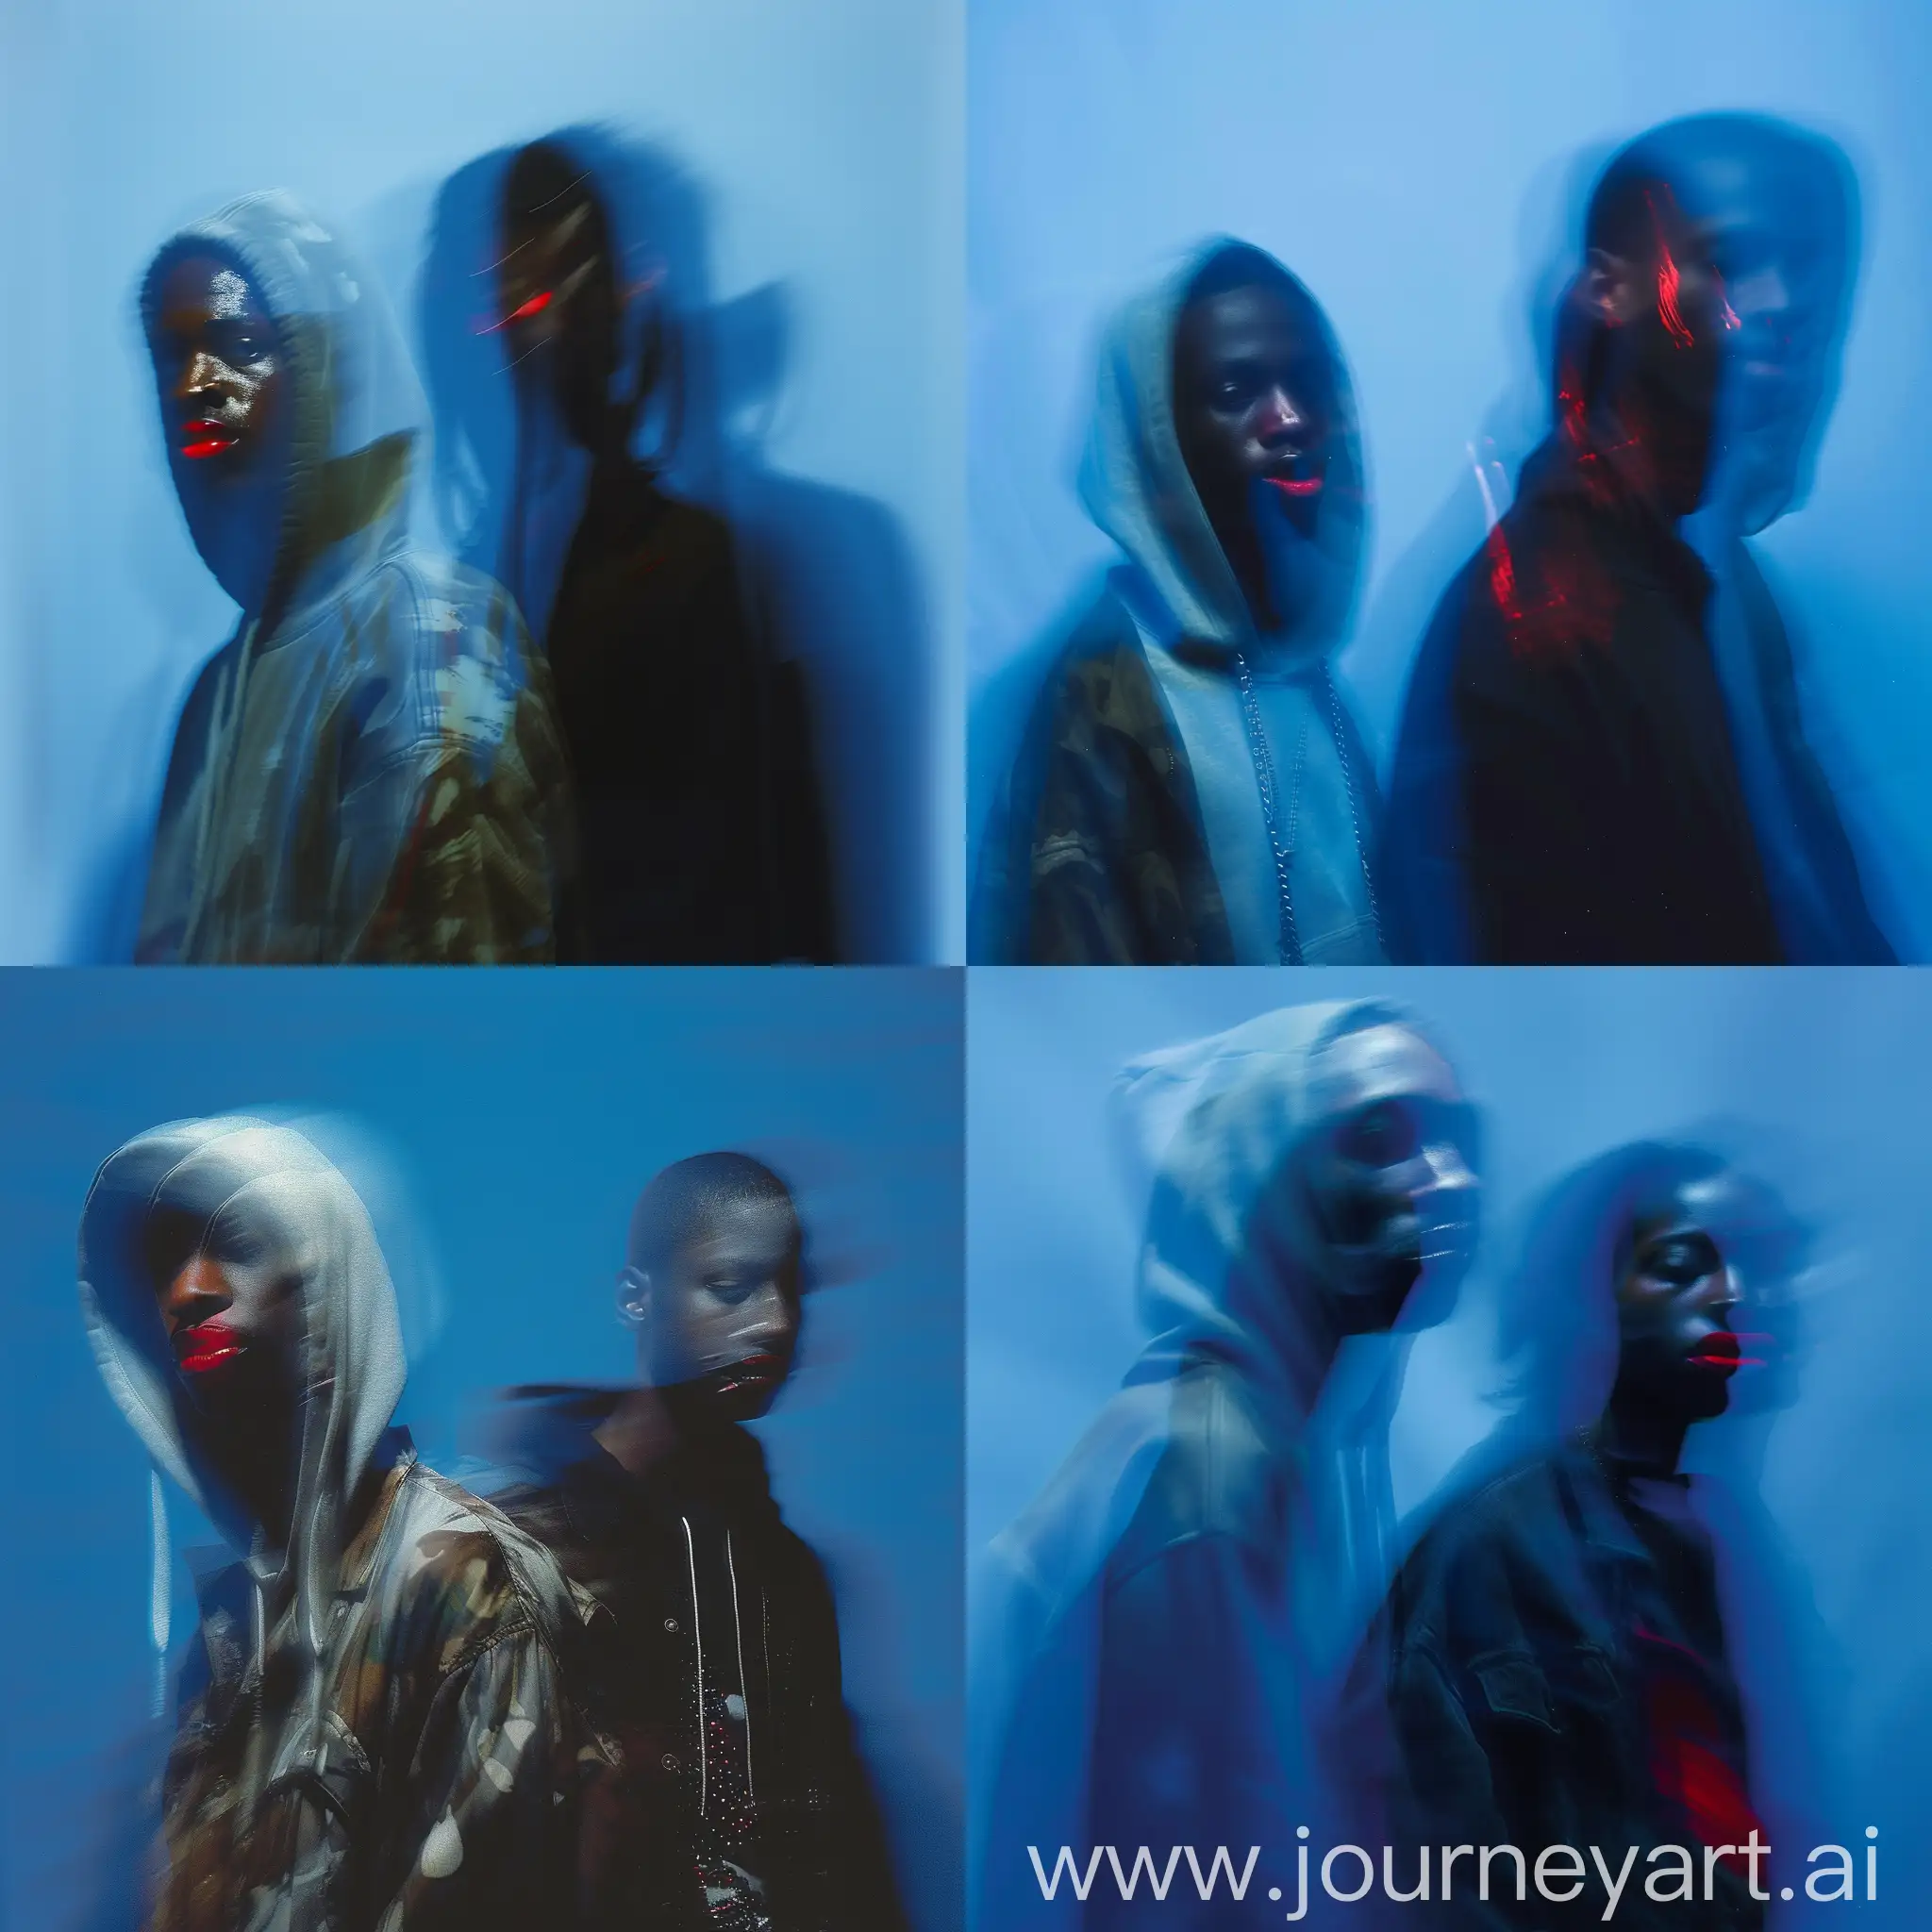 Create image image, two blurred black men figures are depicted against a blue background. The motion blur creates a ghostly, ethereal effect, with facial features and clothing details obscured. One figure in the foreground appears to be wearing a hip hop clothes and hoody in a light color, contrasting with the second figure, which is in a darker outfit. The lighting and blur lend a mysterious, almost haunting quality to the scene. Many acid colors red lipswtic black women